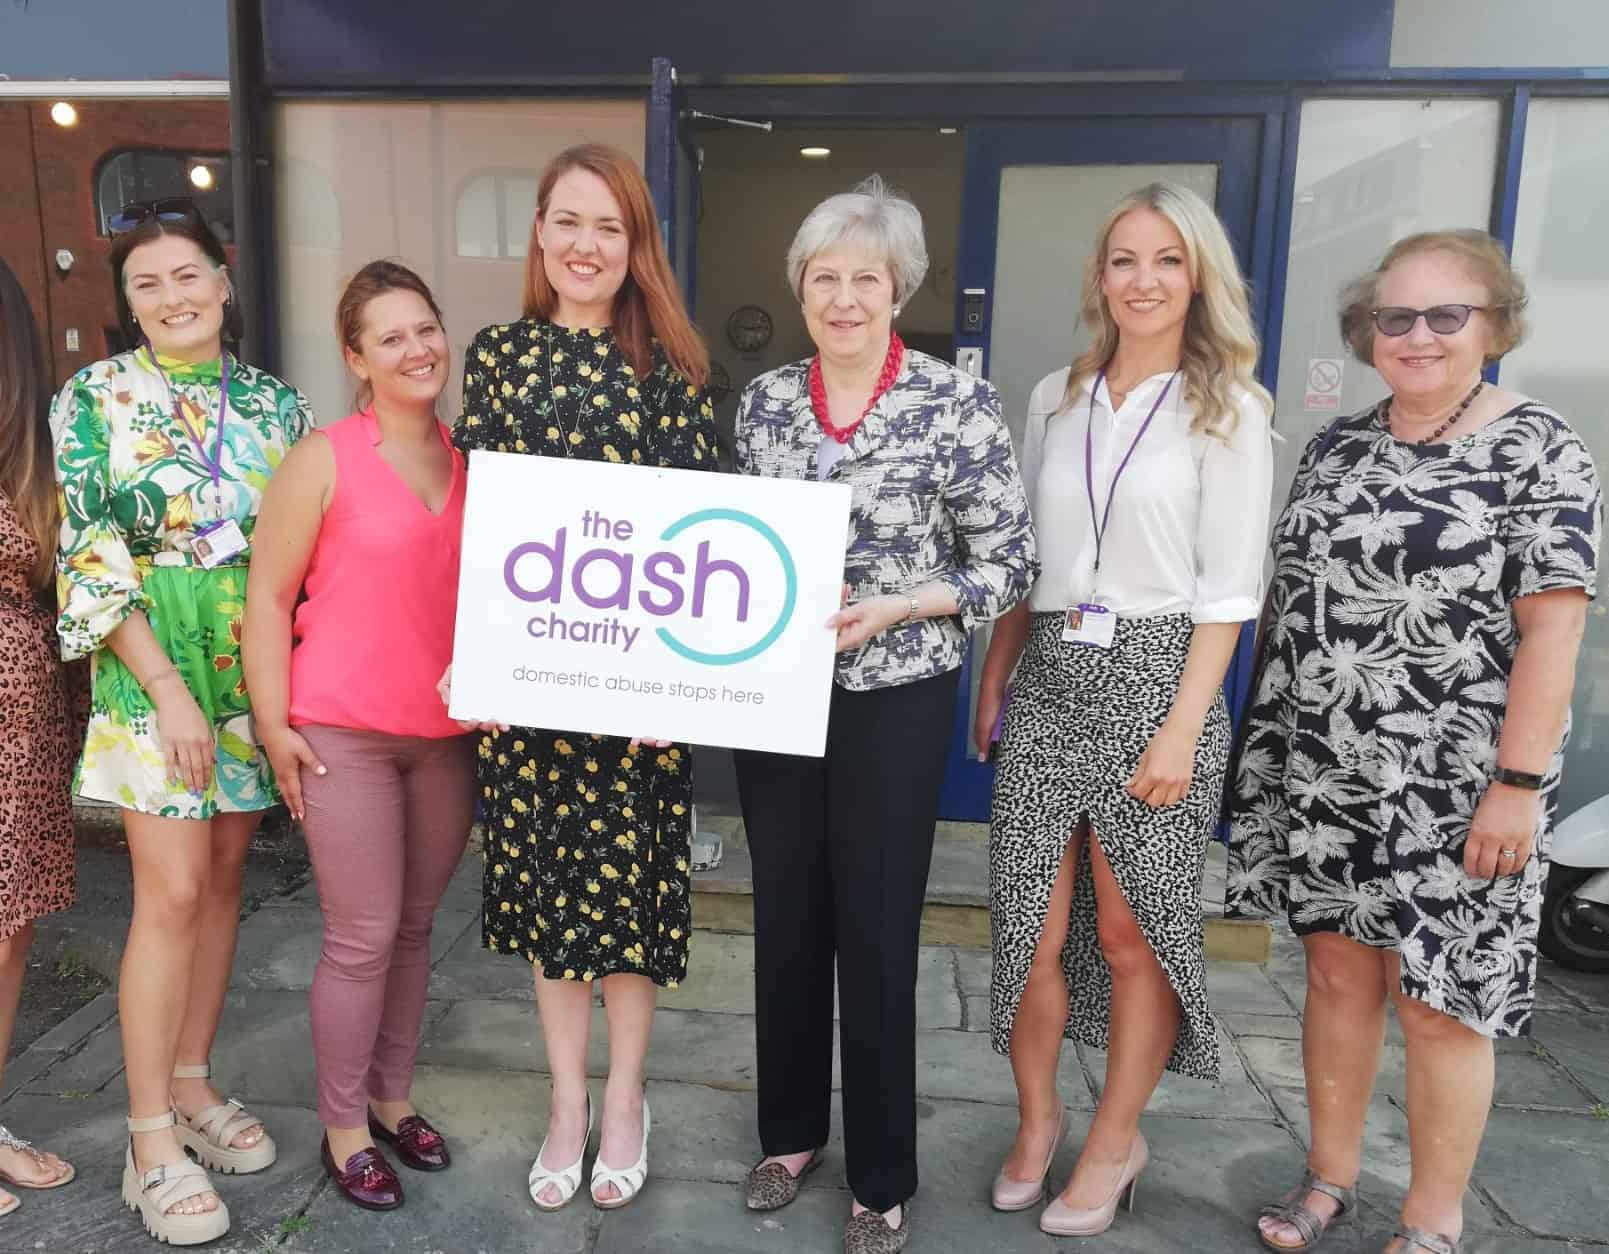 Six women stand facing the camera, including CEO Nicola Miller and Theresa Map MP in the centre holding The Dash Charity logo on a small sign.